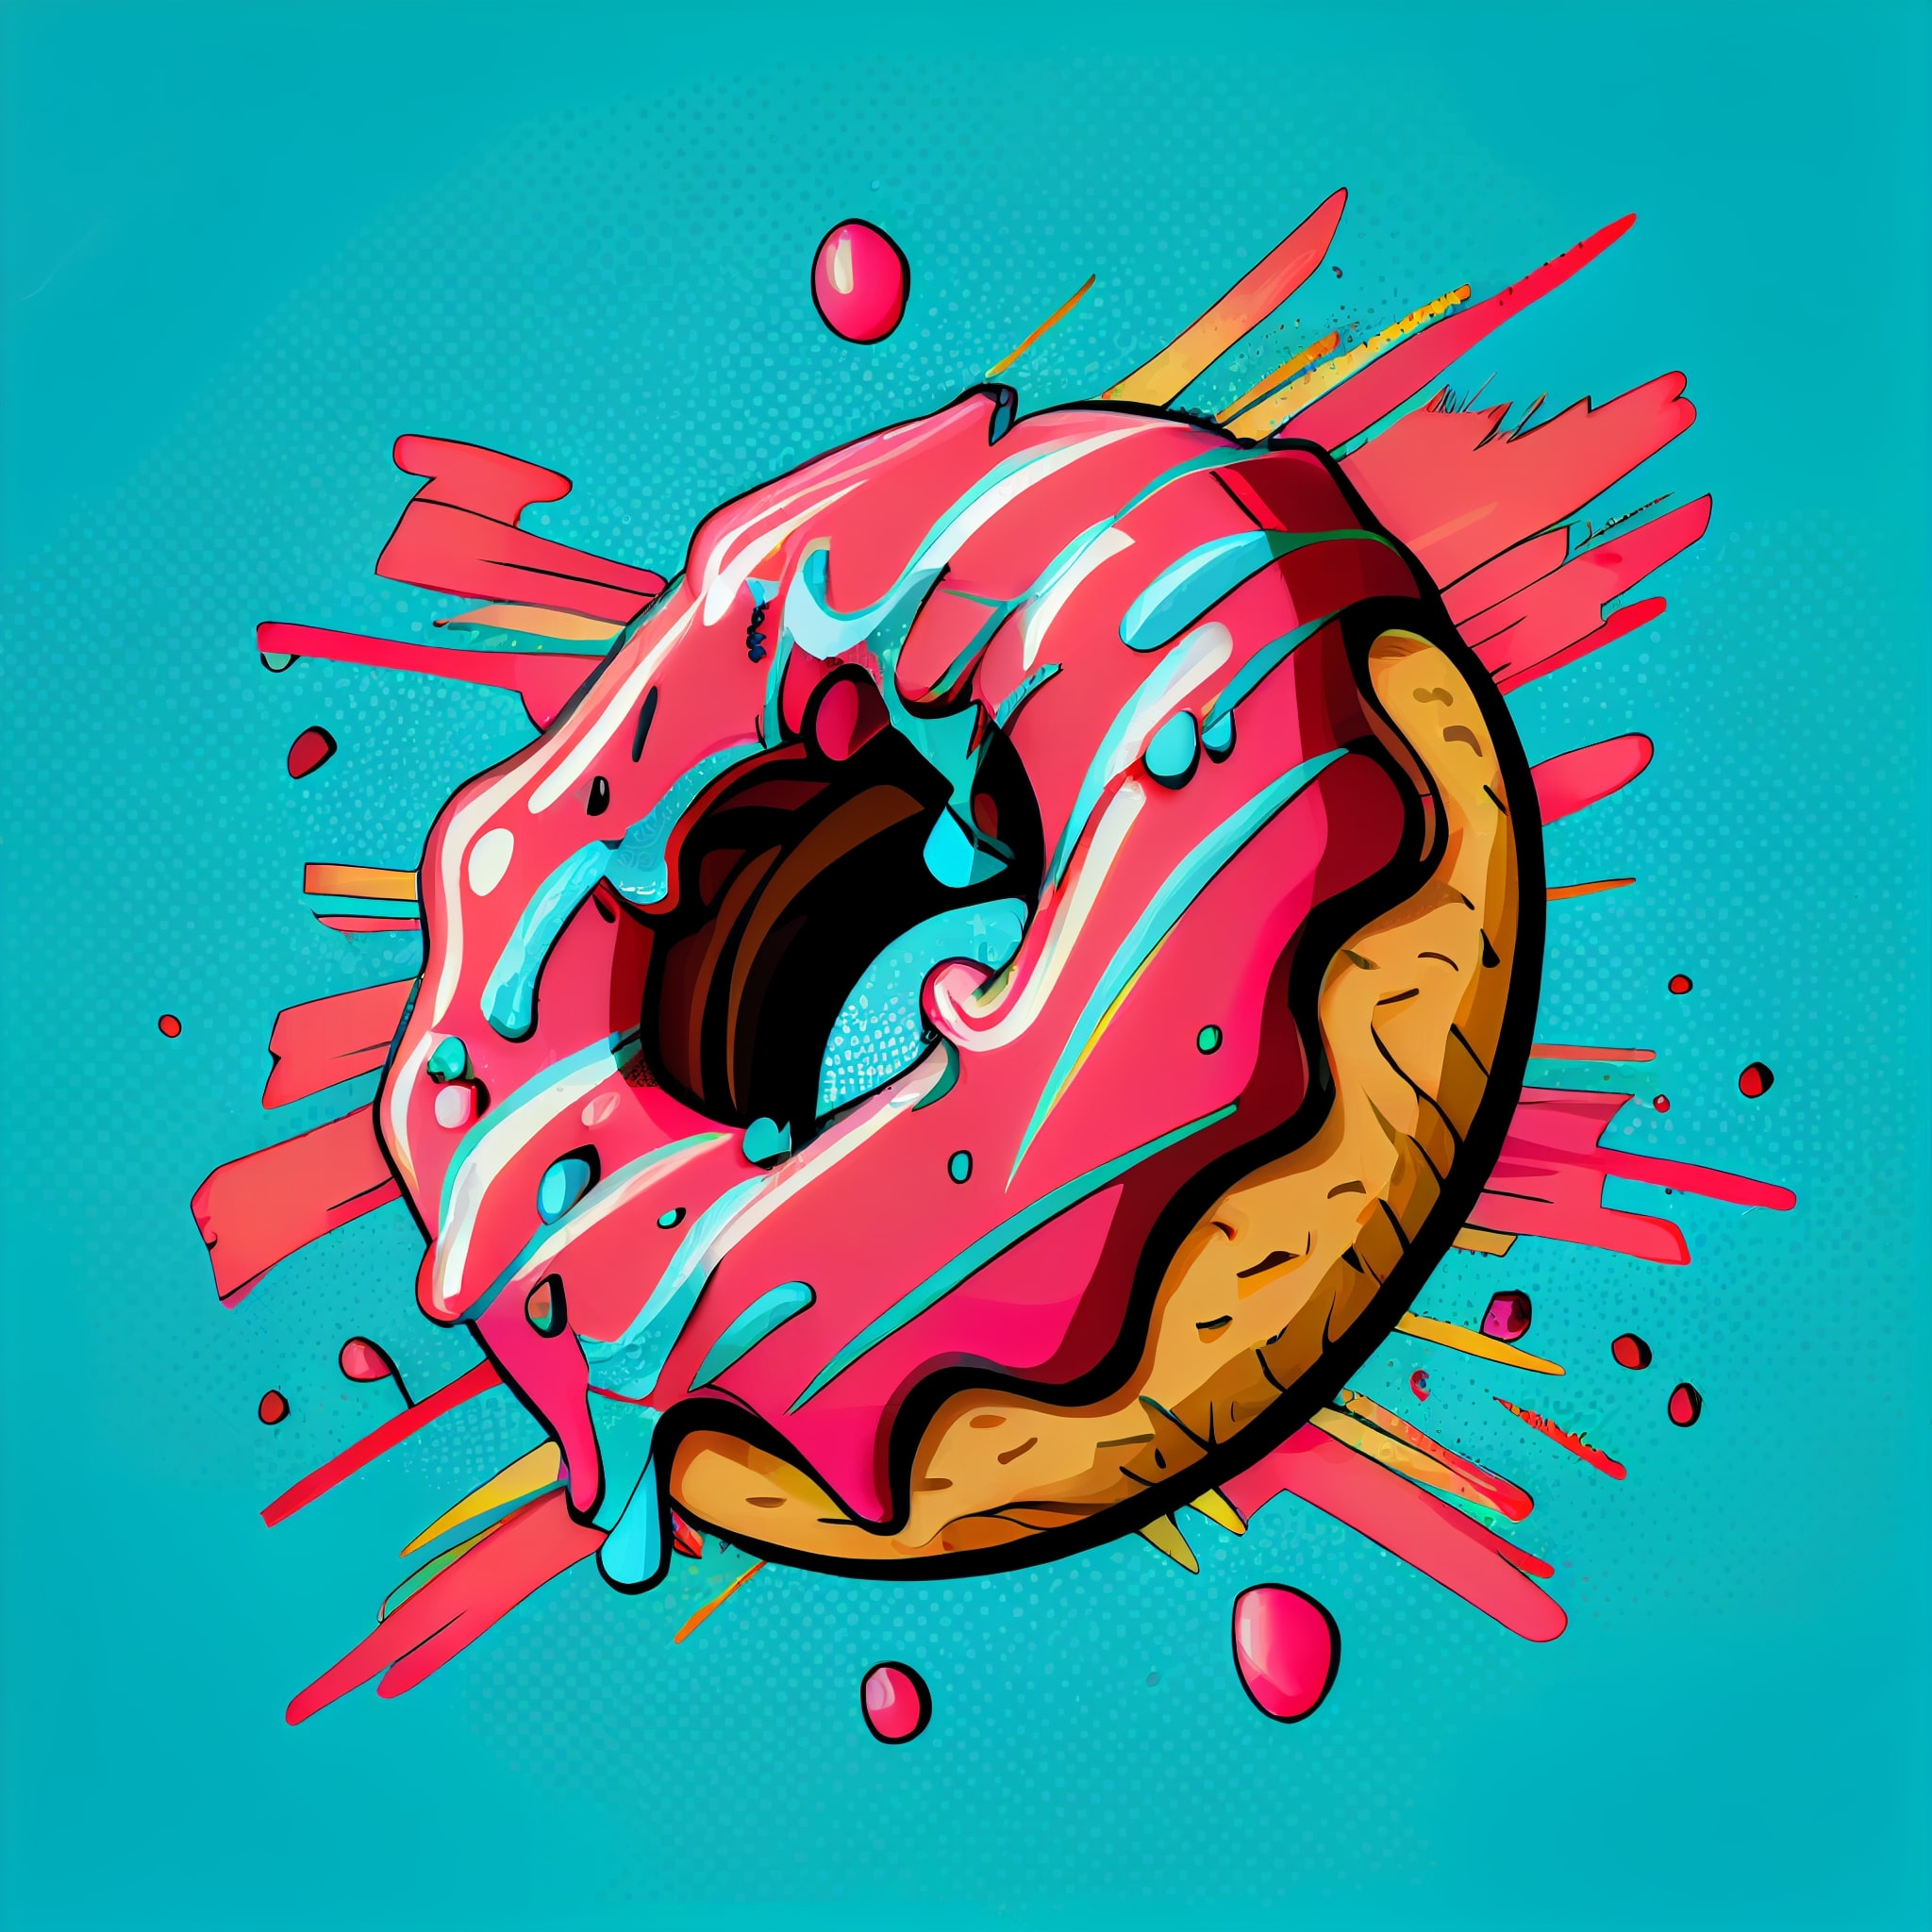 Donut with pink icing and sprinkles on a blue background.